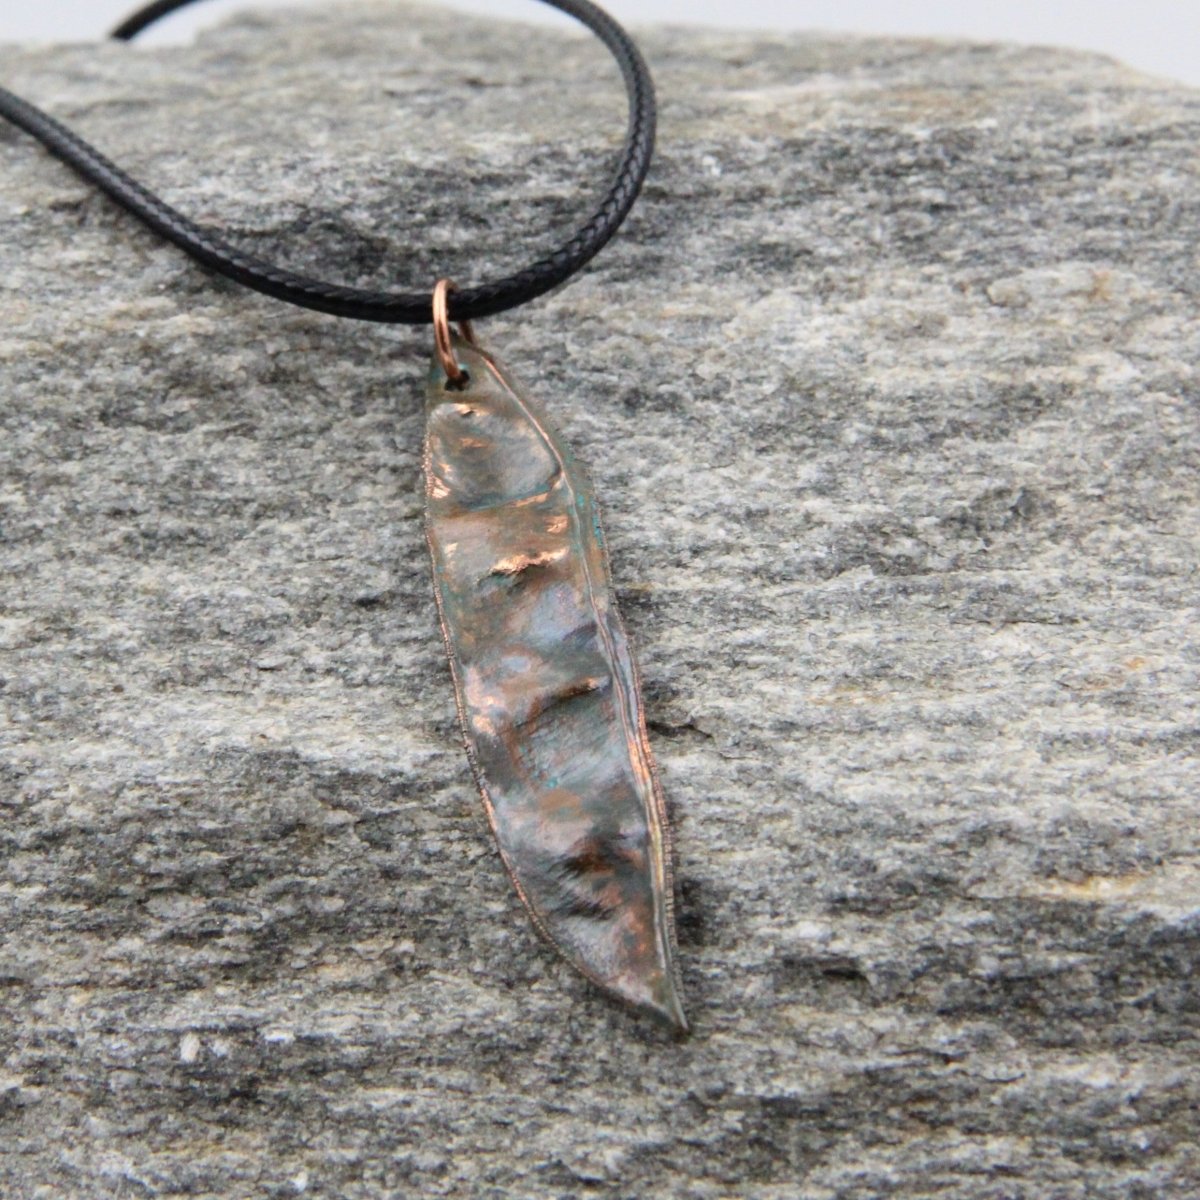 Real Plant Jewelry, Redbud Tree Seed Pod, Cercis canadensis, Copper Electroformed Pendant with Antique Patina, Gift for Nature Lover